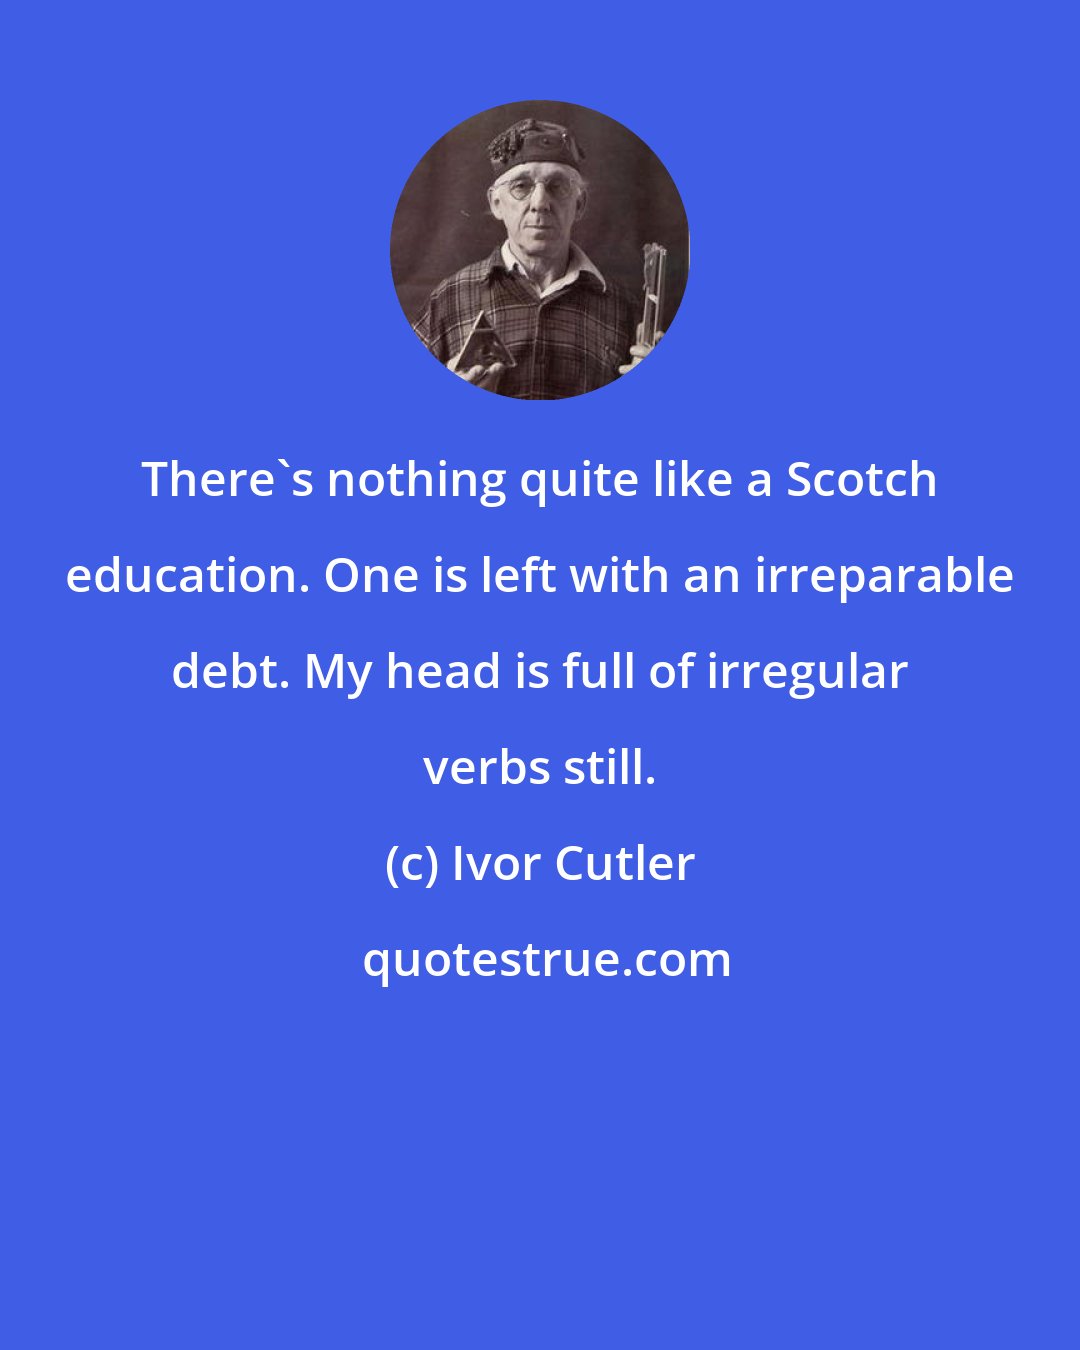 Ivor Cutler: There's nothing quite like a Scotch education. One is left with an irreparable debt. My head is full of irregular verbs still.